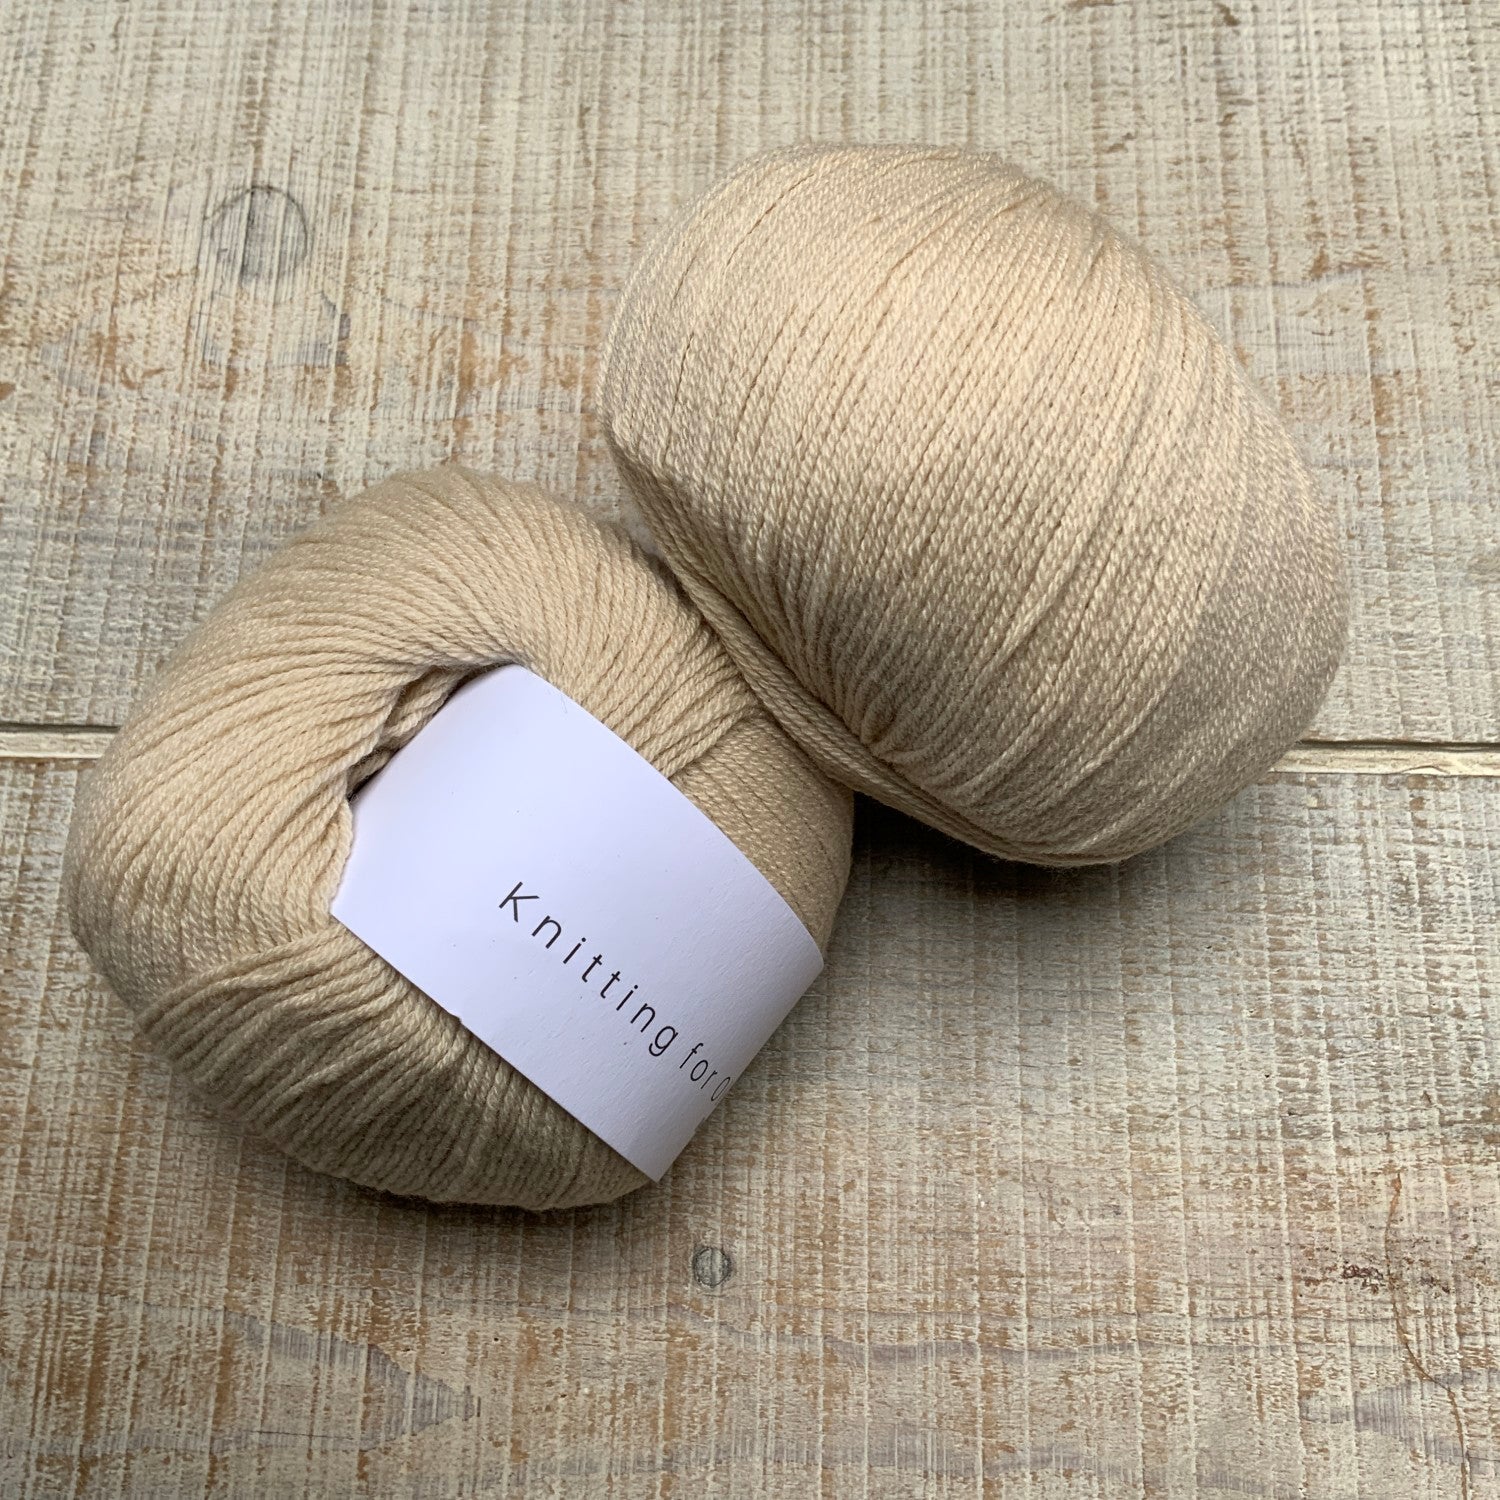 Knitting For Olive arrives at Titityy! - Lankakauppa Titityy - Titityy  Online Yarn Shop